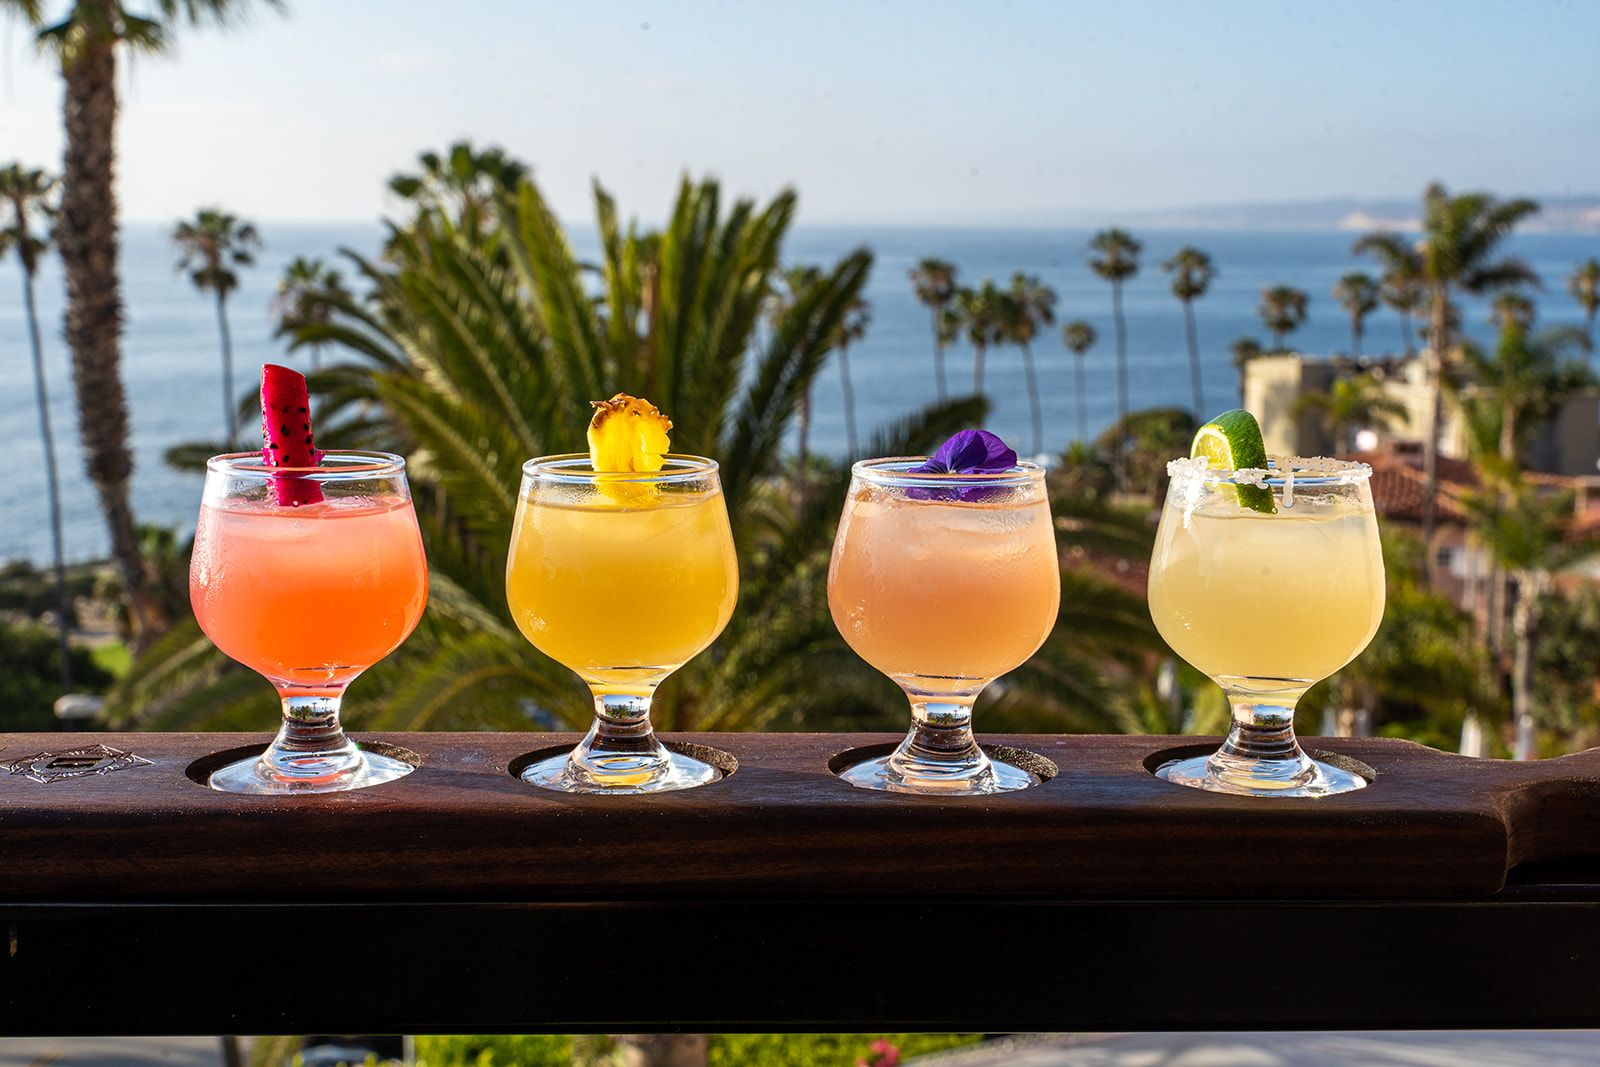 Four bright-colored cocktails with fruit garnishes sit on a wooden holder on a rooftop patio overlooking the ocean and palm trees.